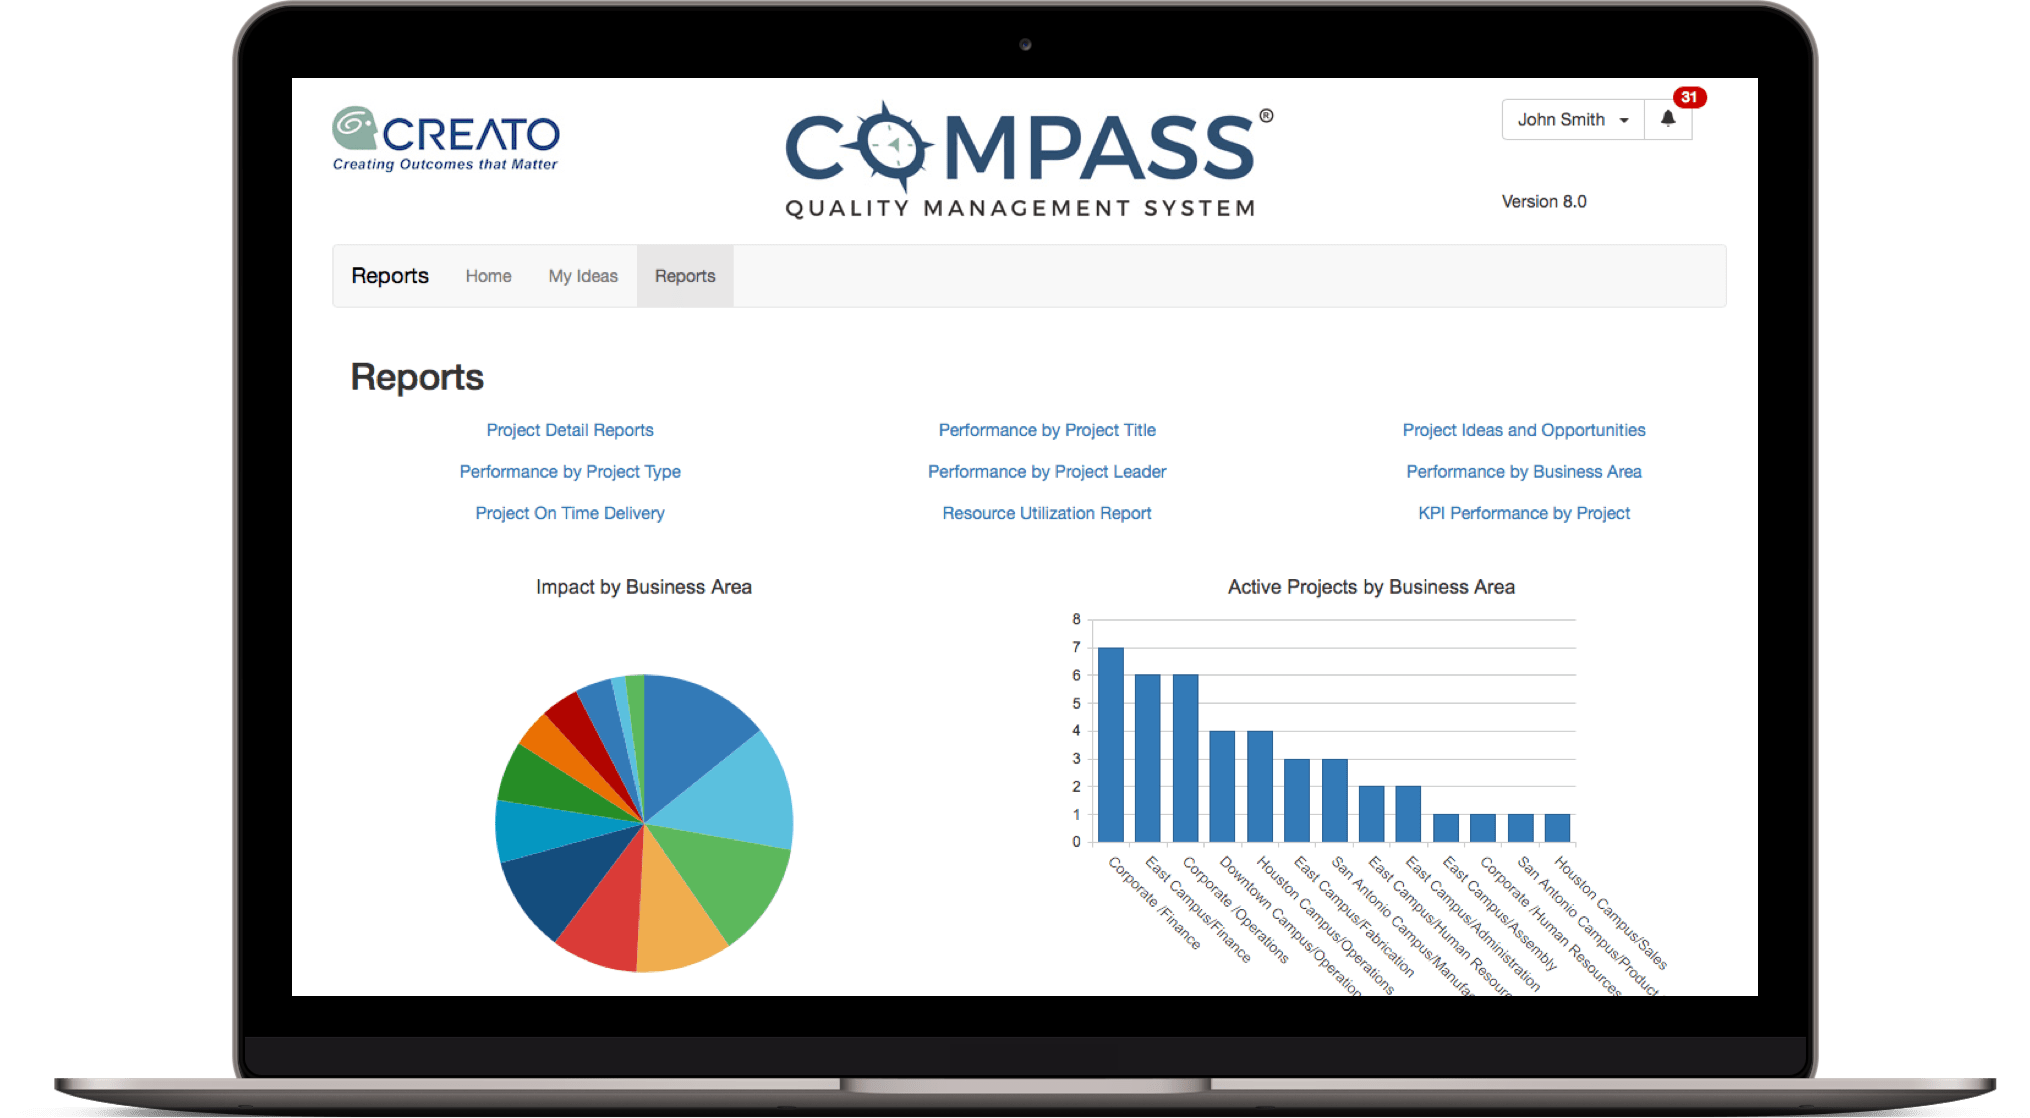 Screenshot of Compass Quality Management System  reporting screen